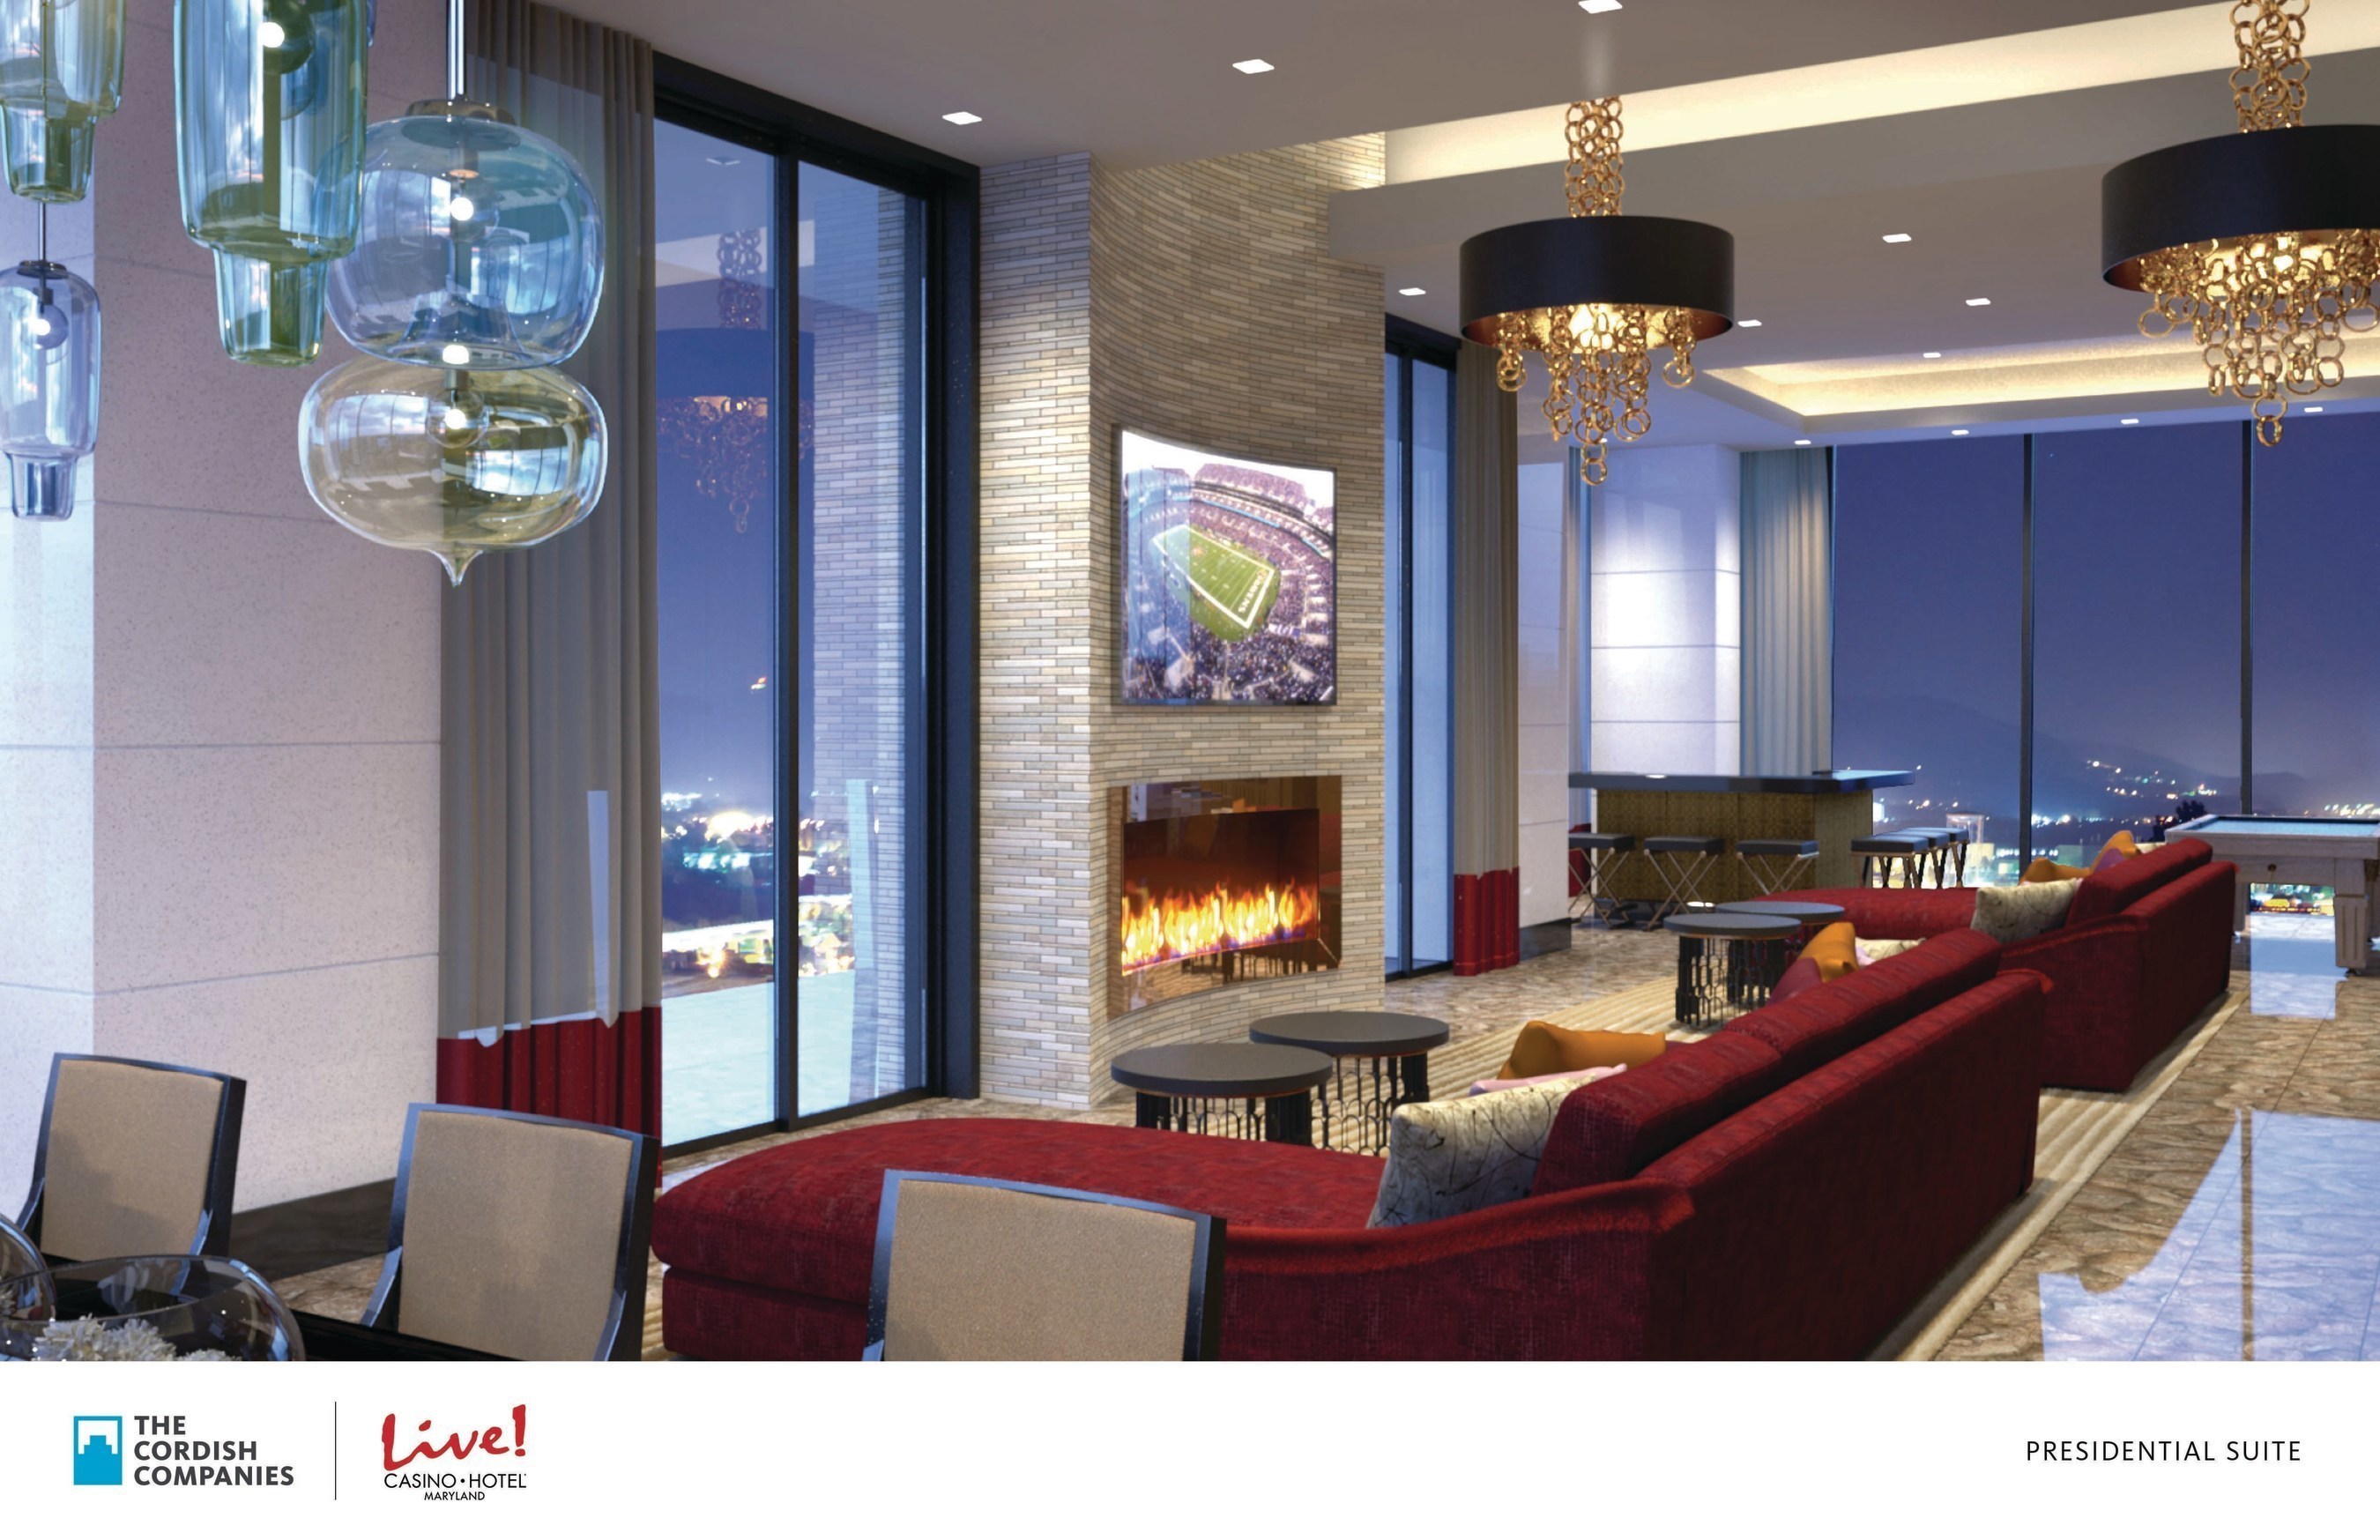 An artists' rendering depicts the Presidential Suite of the new $200 million flagship Live! Hotel. The Cordish Companies today broke ground on the development, which will be located at Maryland Live! Casino, in Hanover, MD. The 350,000- square- foot property features a 17-story hotel tower, making it the tallest building in Anne Arundel County, with 310 guest rooms, an event center, meeting spaces, new dining options, and a day spa/salon. It is the first hotel in the country to carry the Live! brand.